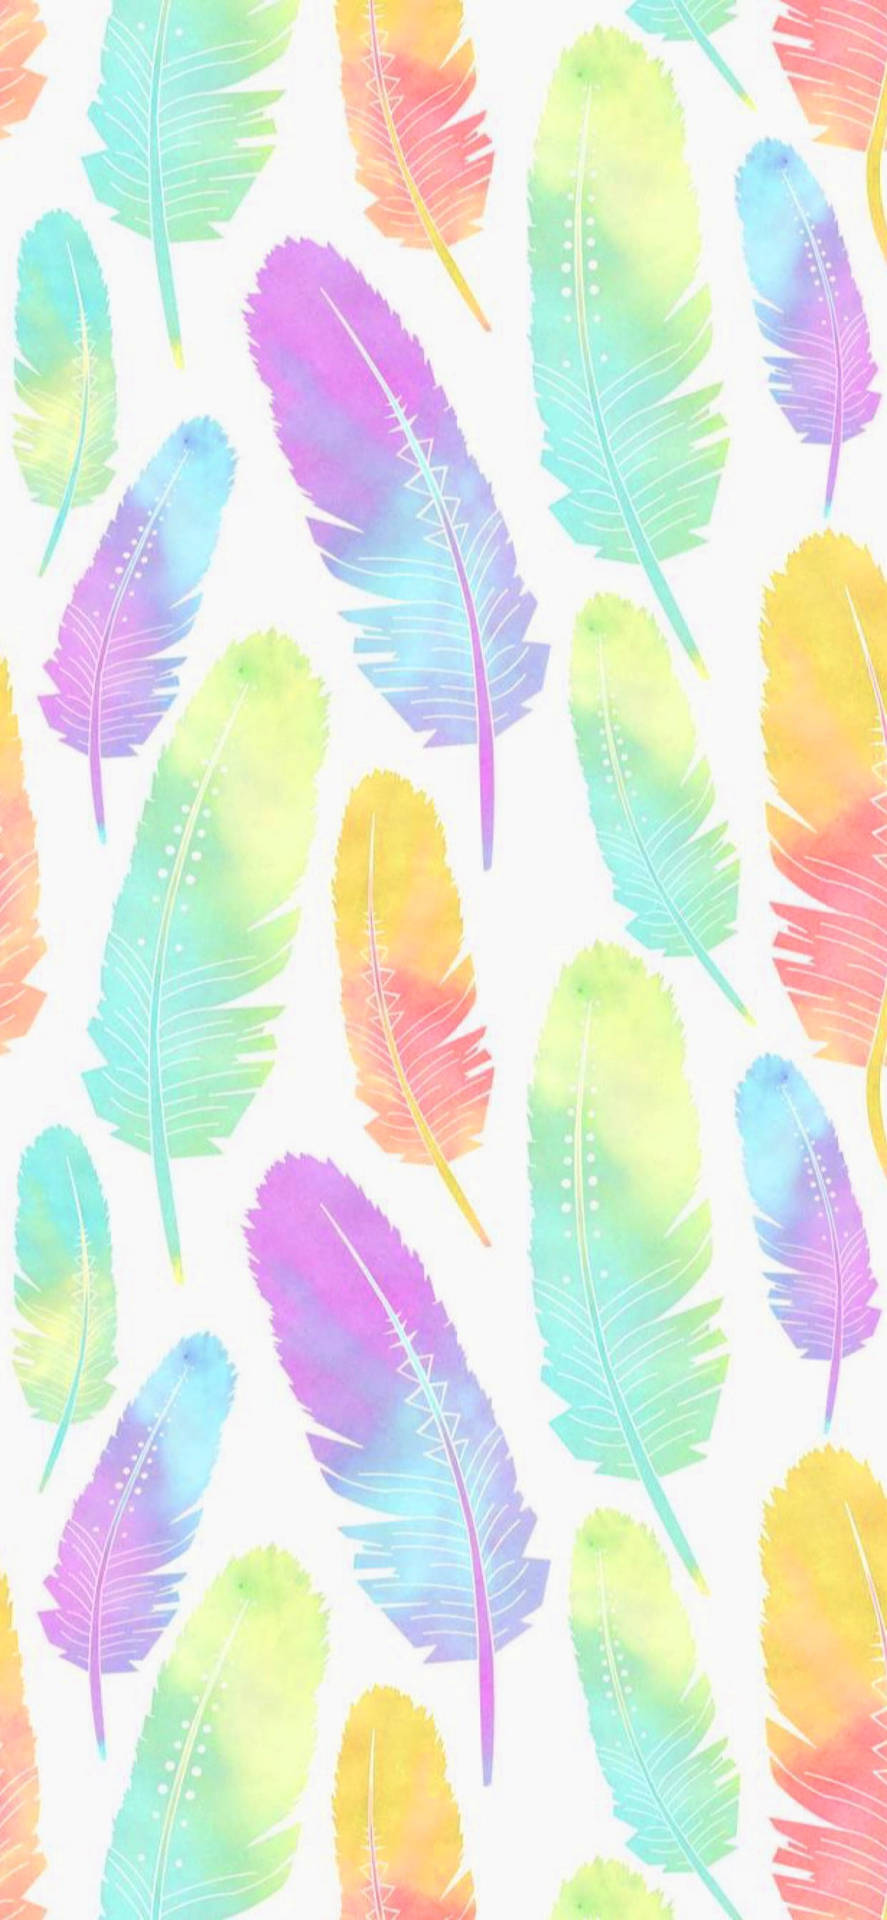 Feathers Cute Pastel Colors